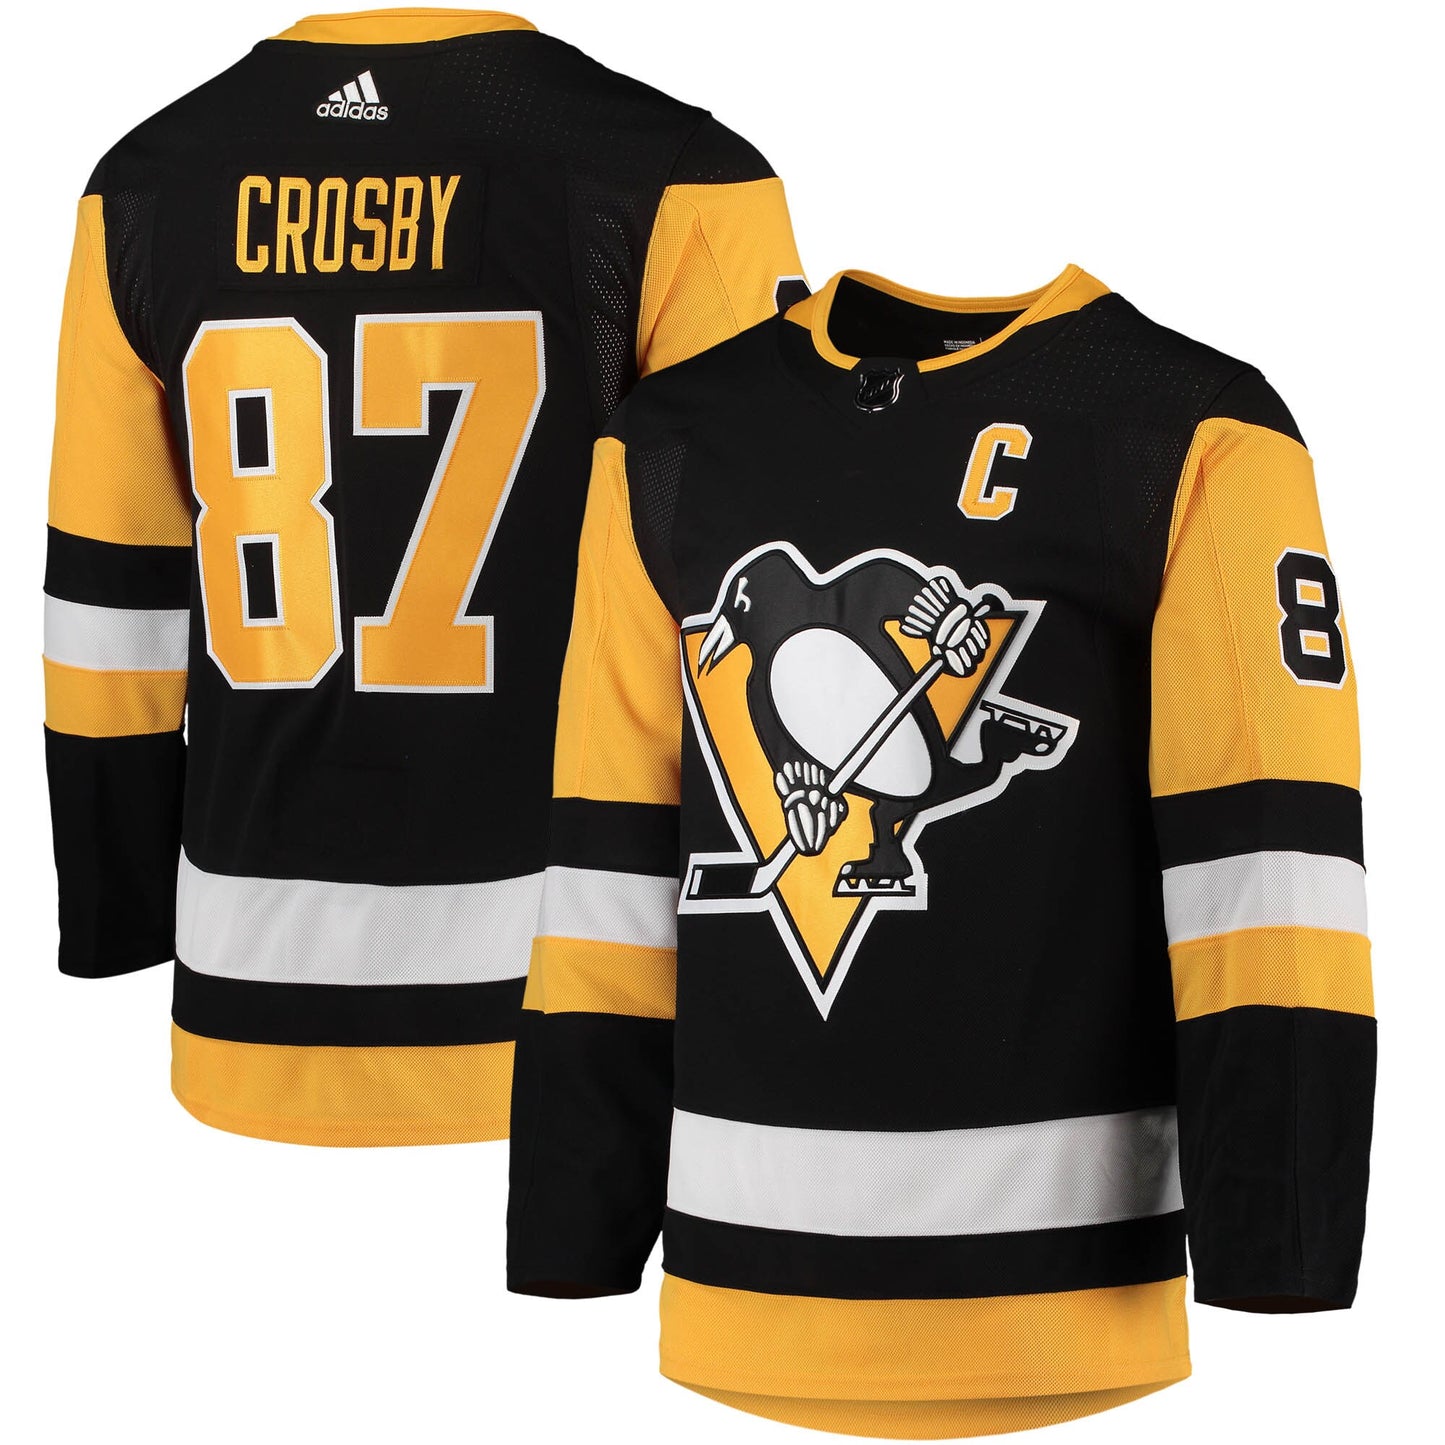 Sidney Crosby Pittsburgh Penguins adidas Home Primegreen Authentic Pro Player Jersey - Black